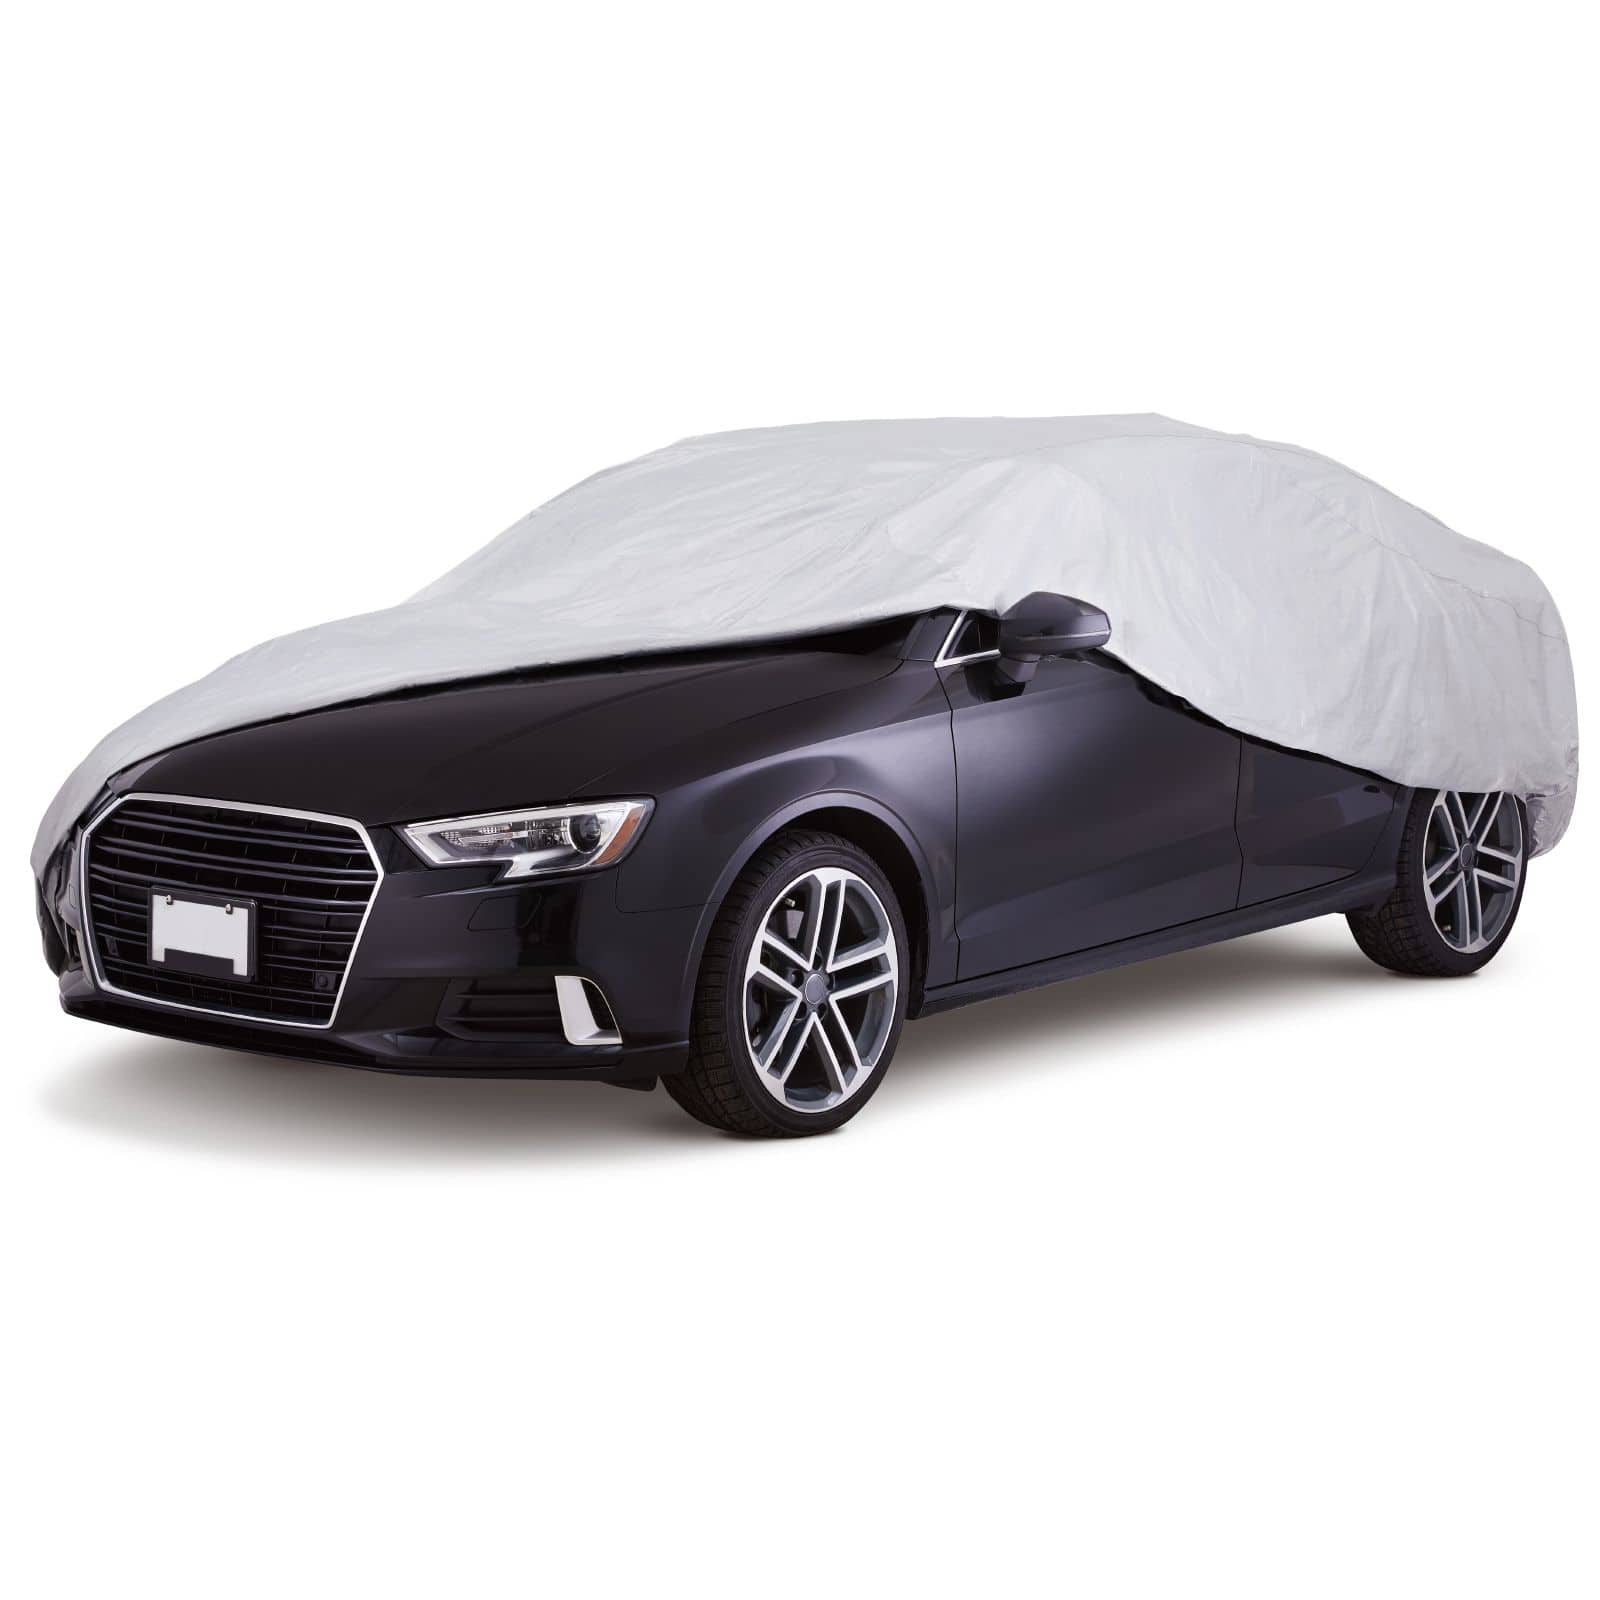 Simoniz Solar Shield Water Resistant Car Cover with UV Protection,  Assorted, Small (041-2685) fits vehicles up to 14'2 (431 cm) in length